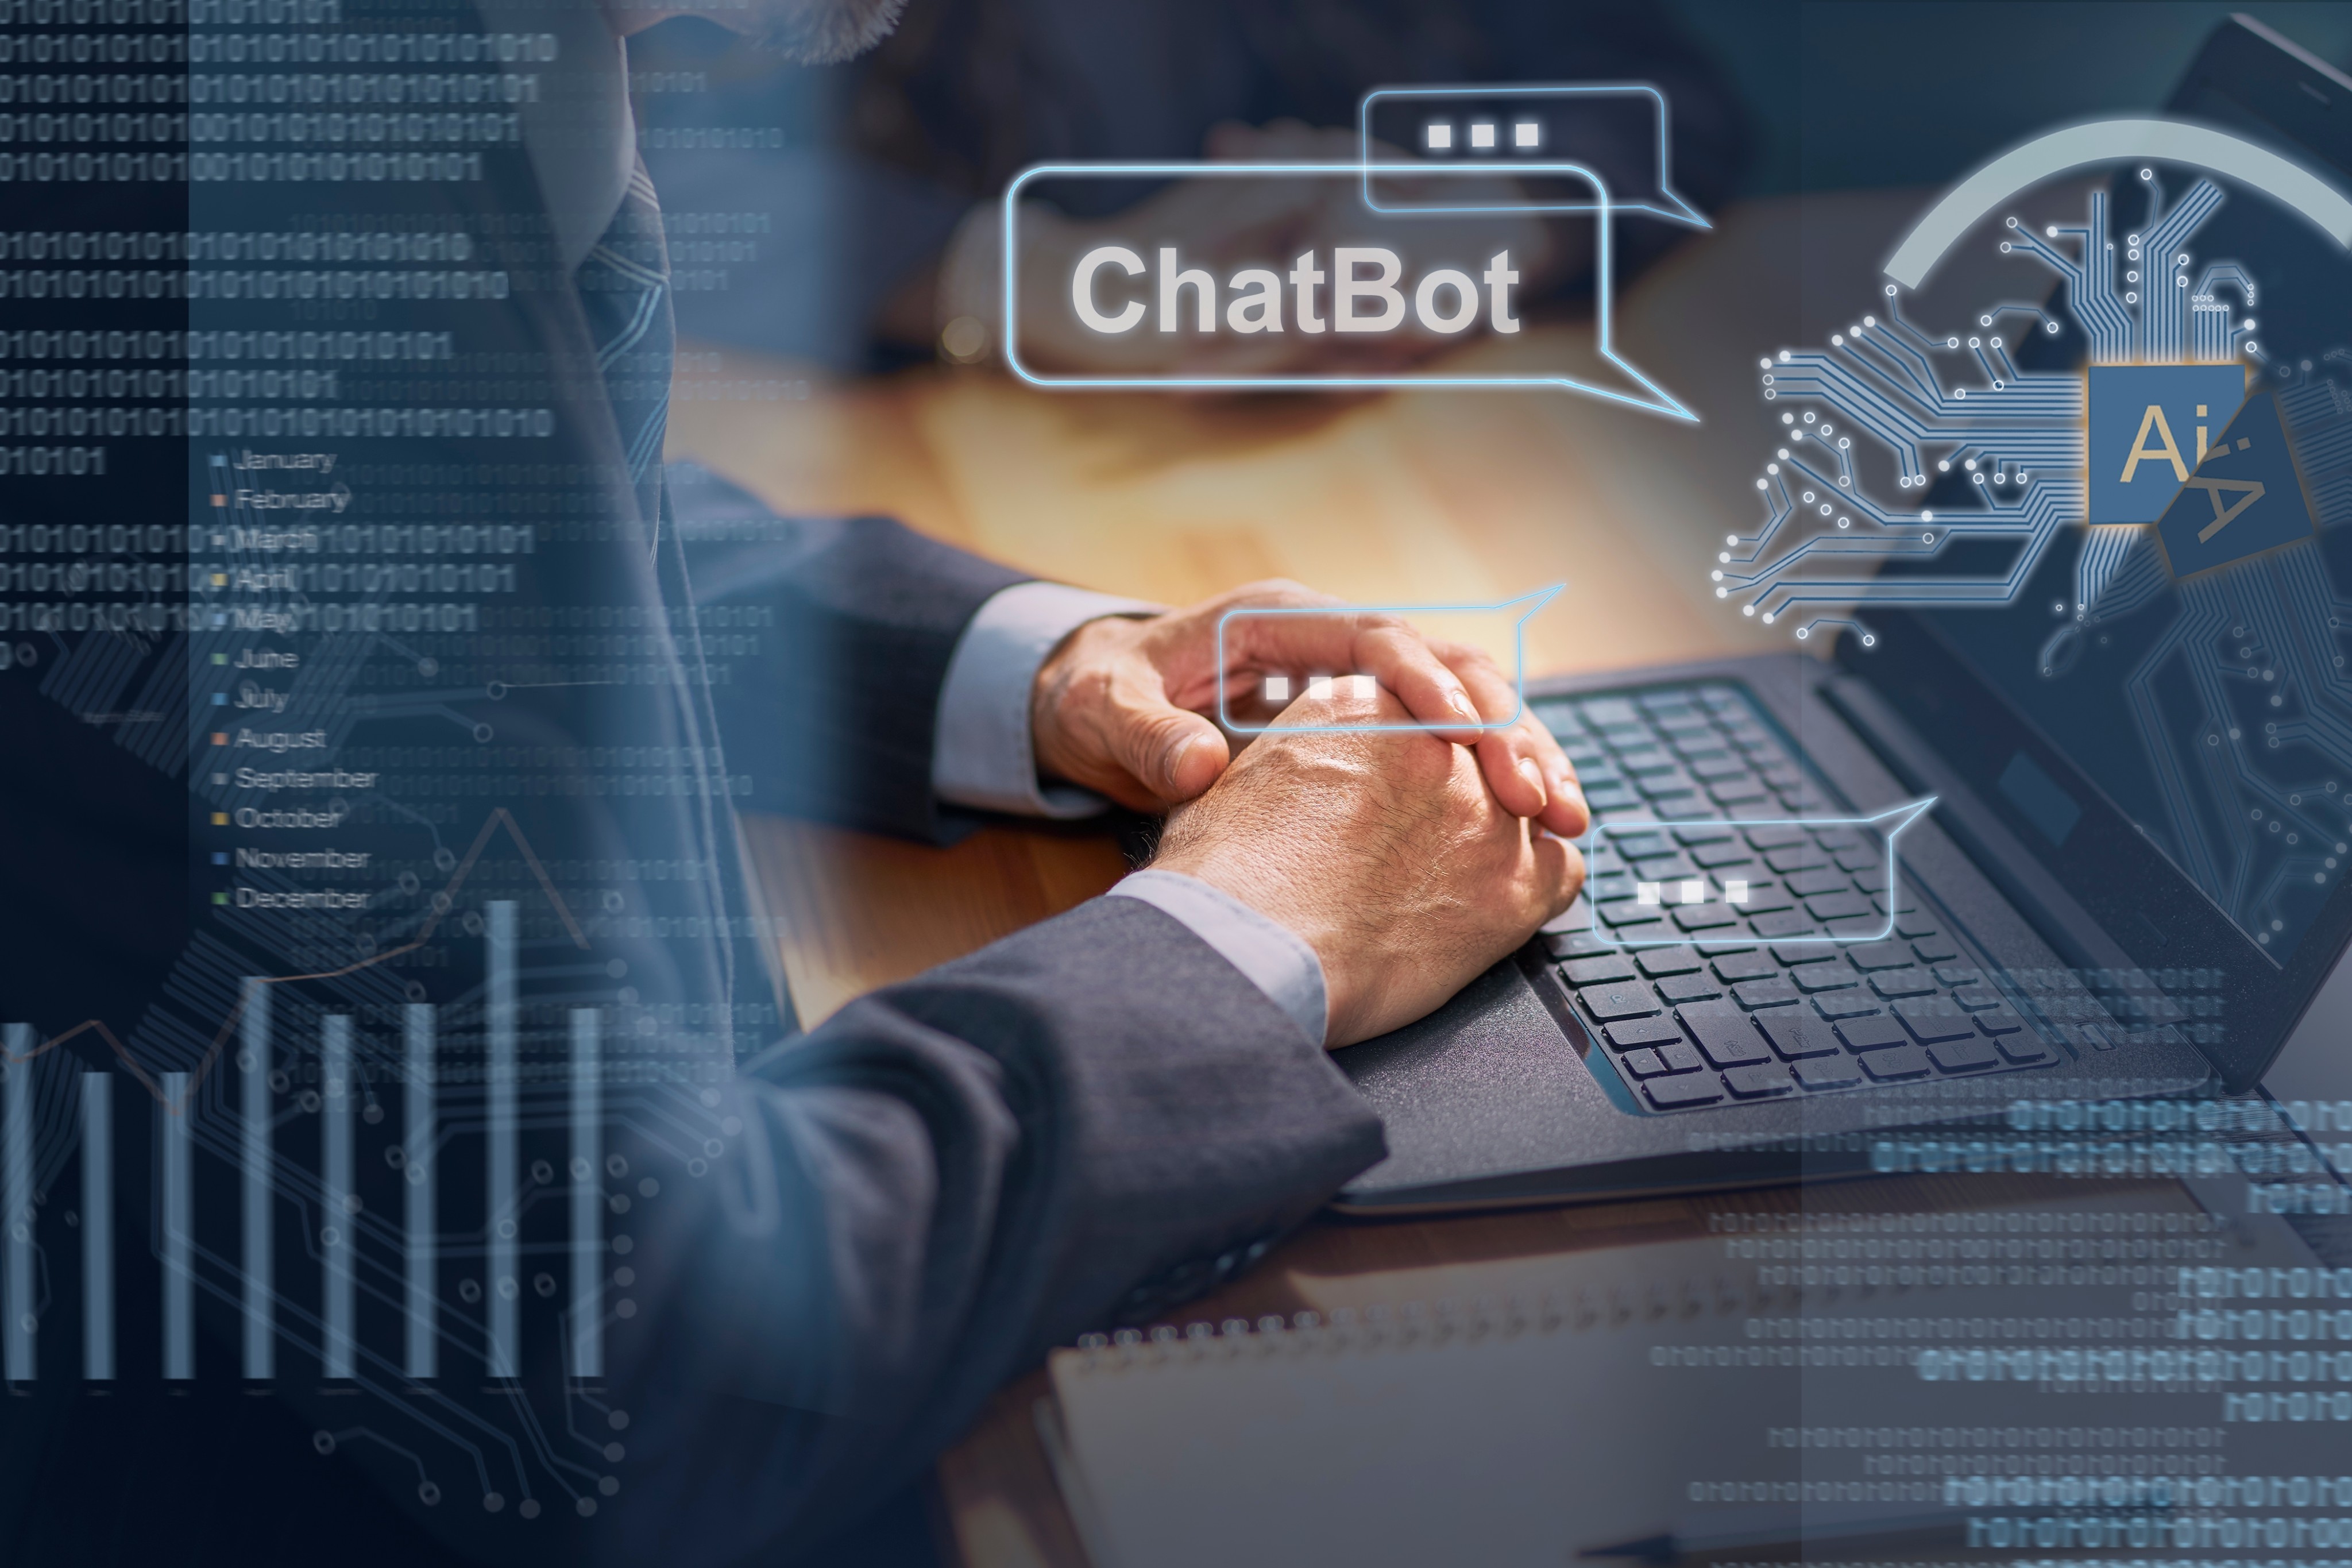 The sudden share price swing that hit iFlytek this week underscores the potential cybersecurity risks posed by generative artificial intelligence systems like ChatGPT and similar chatbot services. Photo: Shutterstock